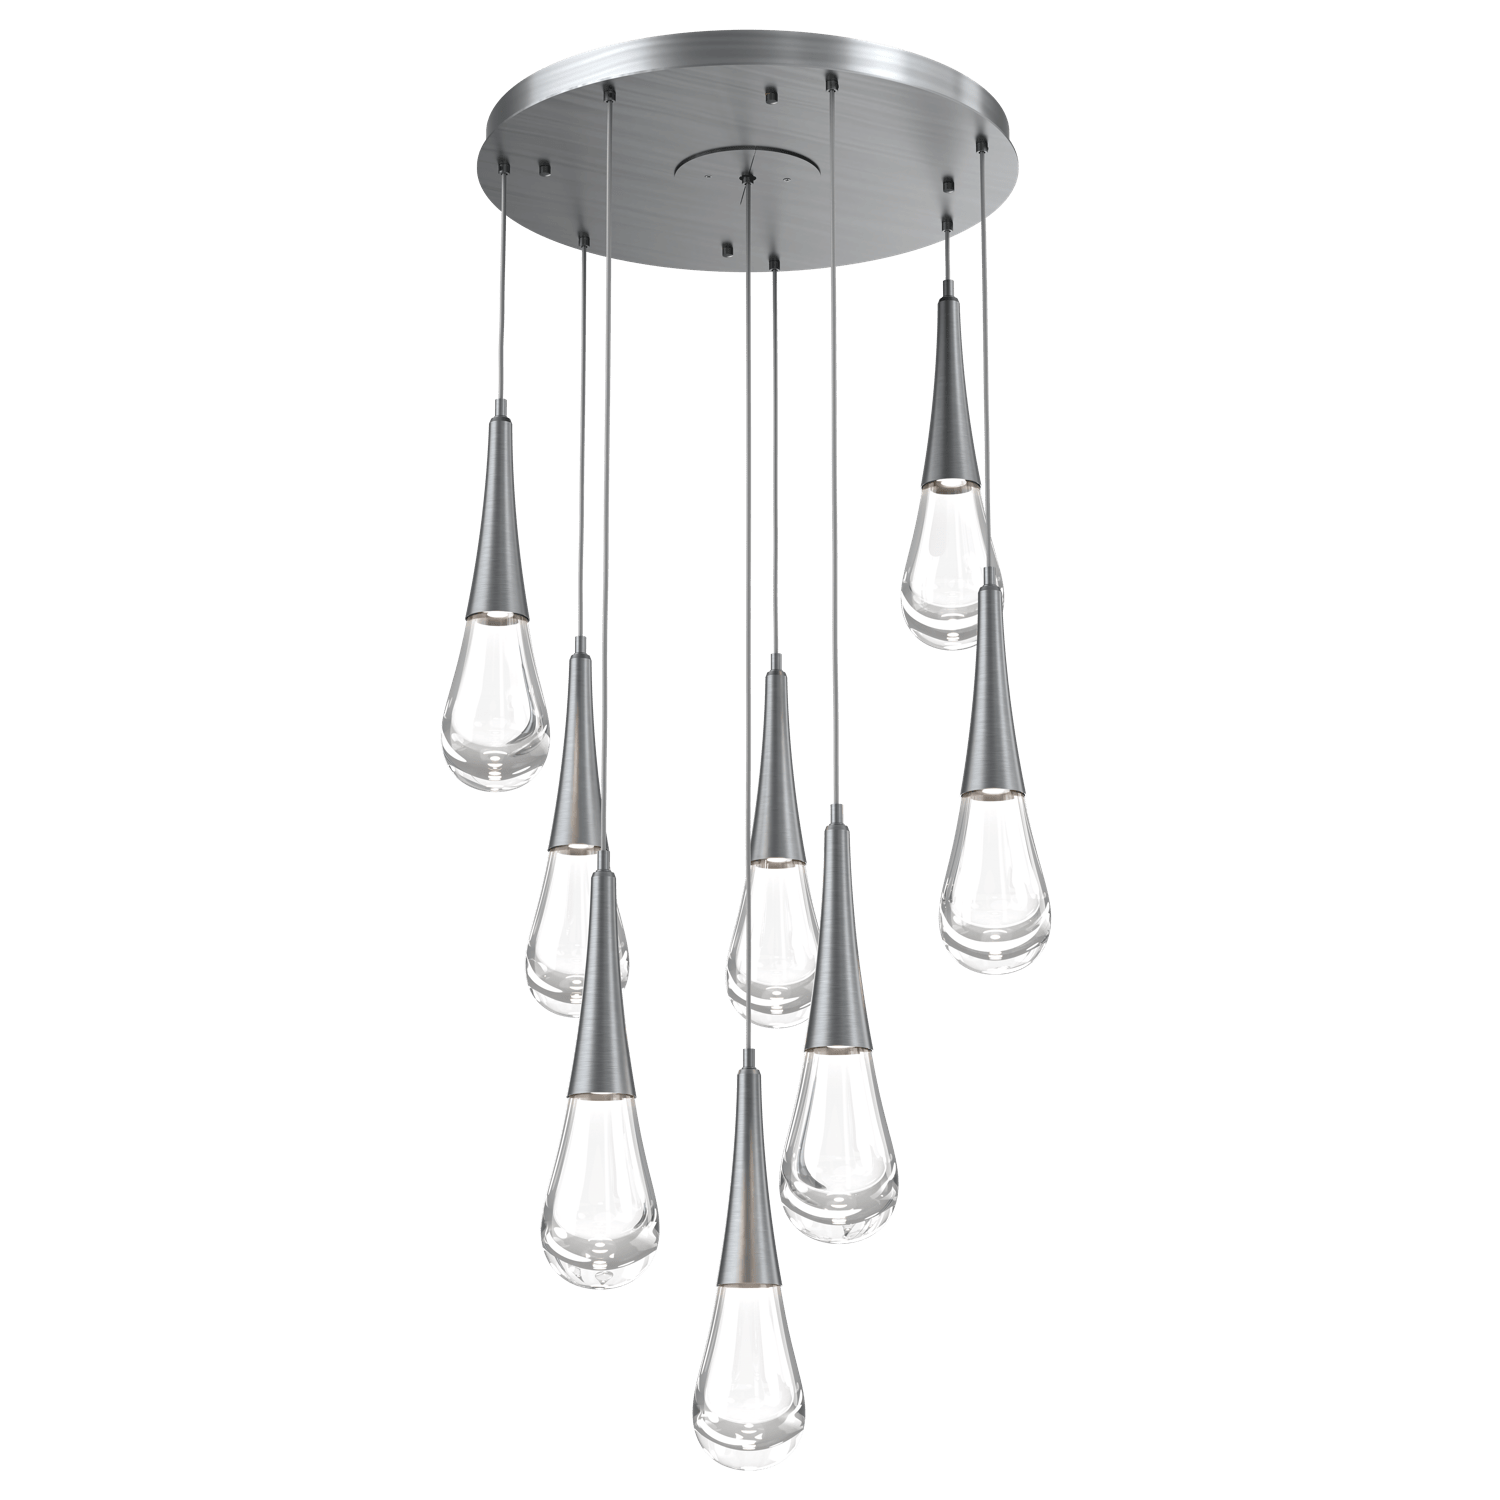 CHB0078-08-GM-Hammerton-Studio-Raindrop-8-light-round-pendant-chandelier-with-gunmetal-finish-and-clear-blown-glass-shades-and-LED-lamping